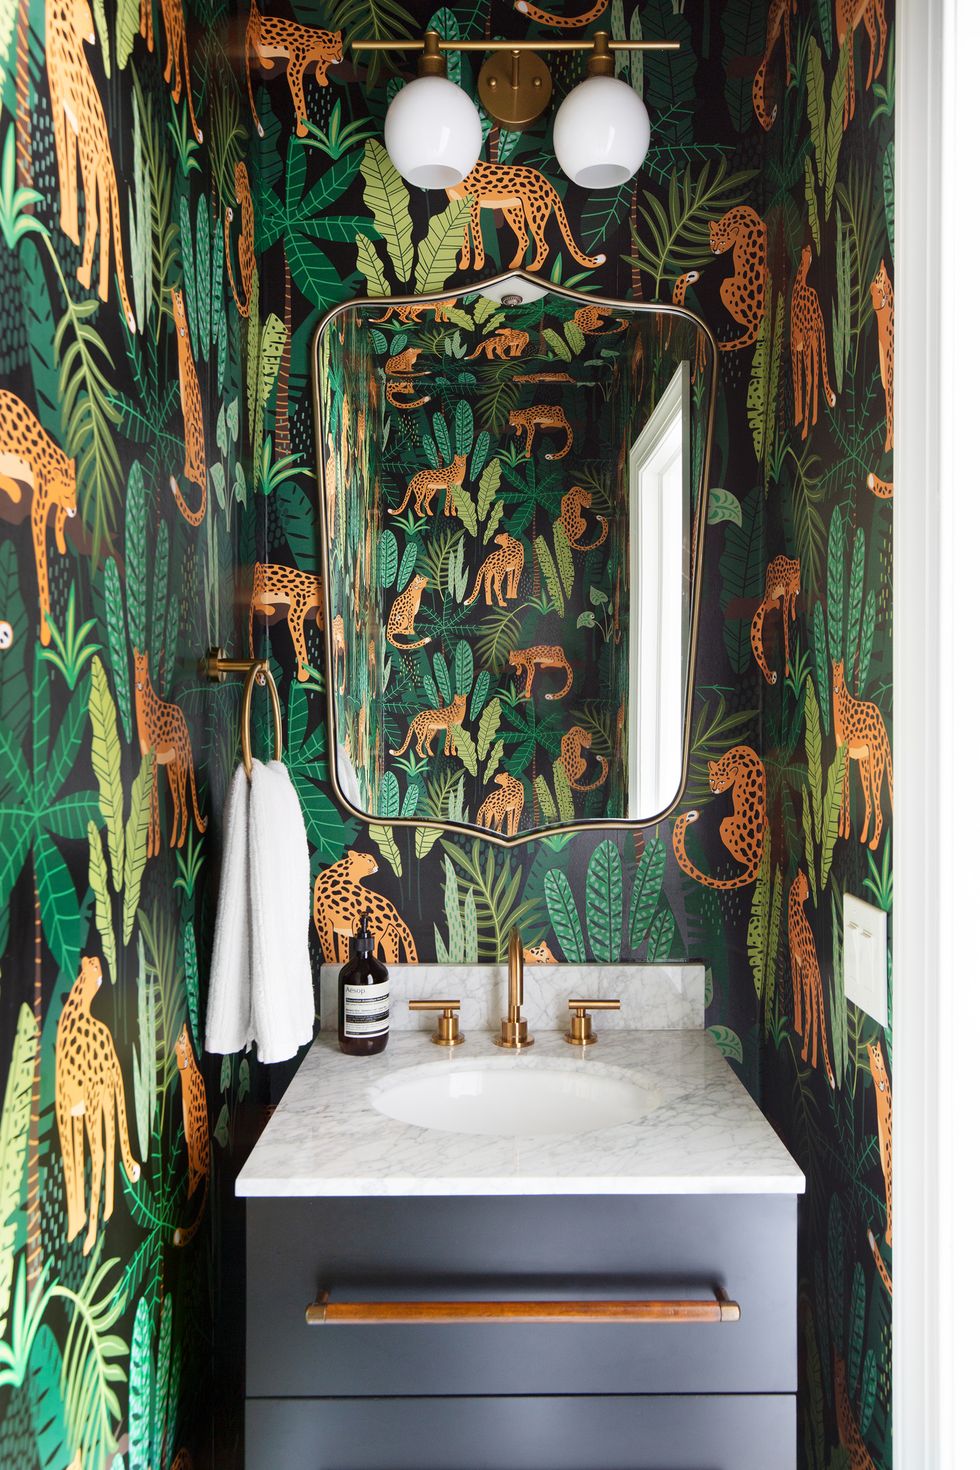 Wallpaper Trends For Bathroom Bedroom And Living Room